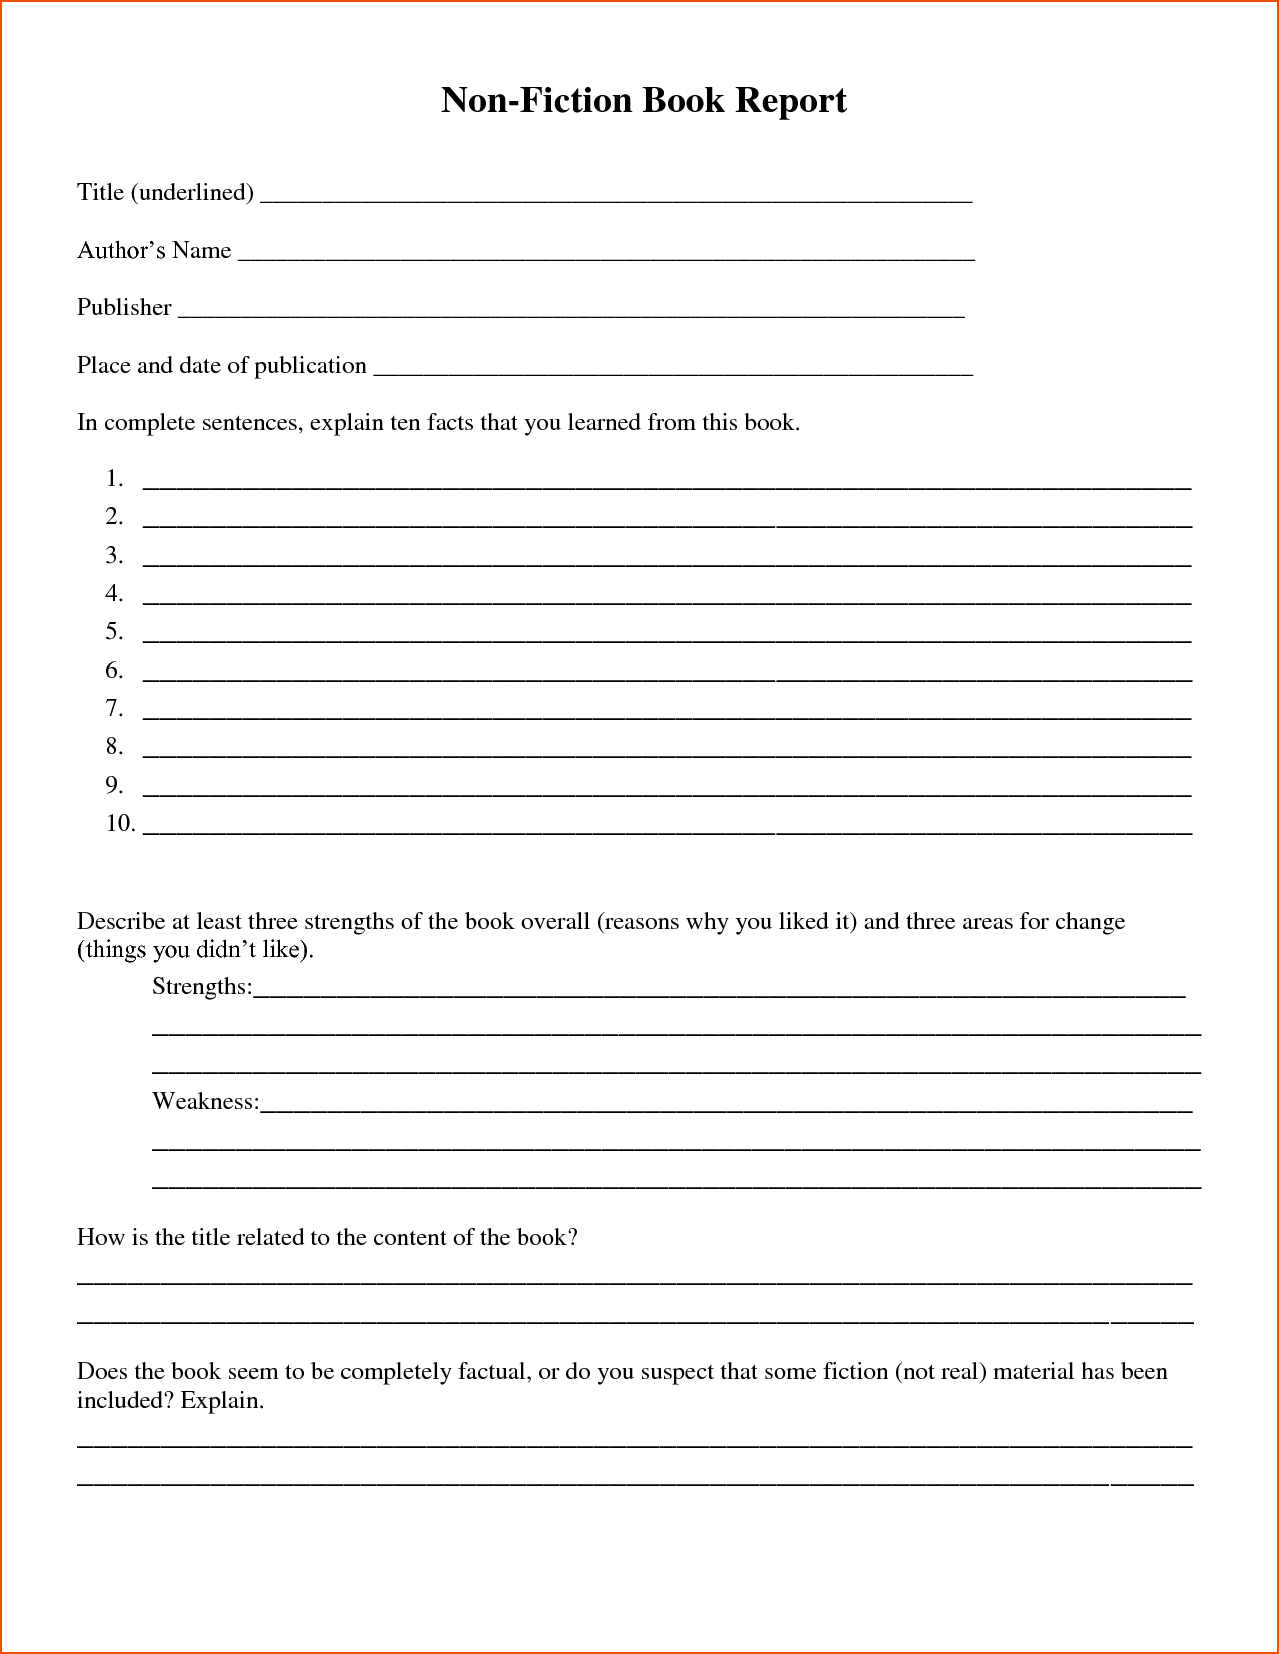 Worksheet For Book Report | Printable Worksheets And For Nonfiction Book Report Template